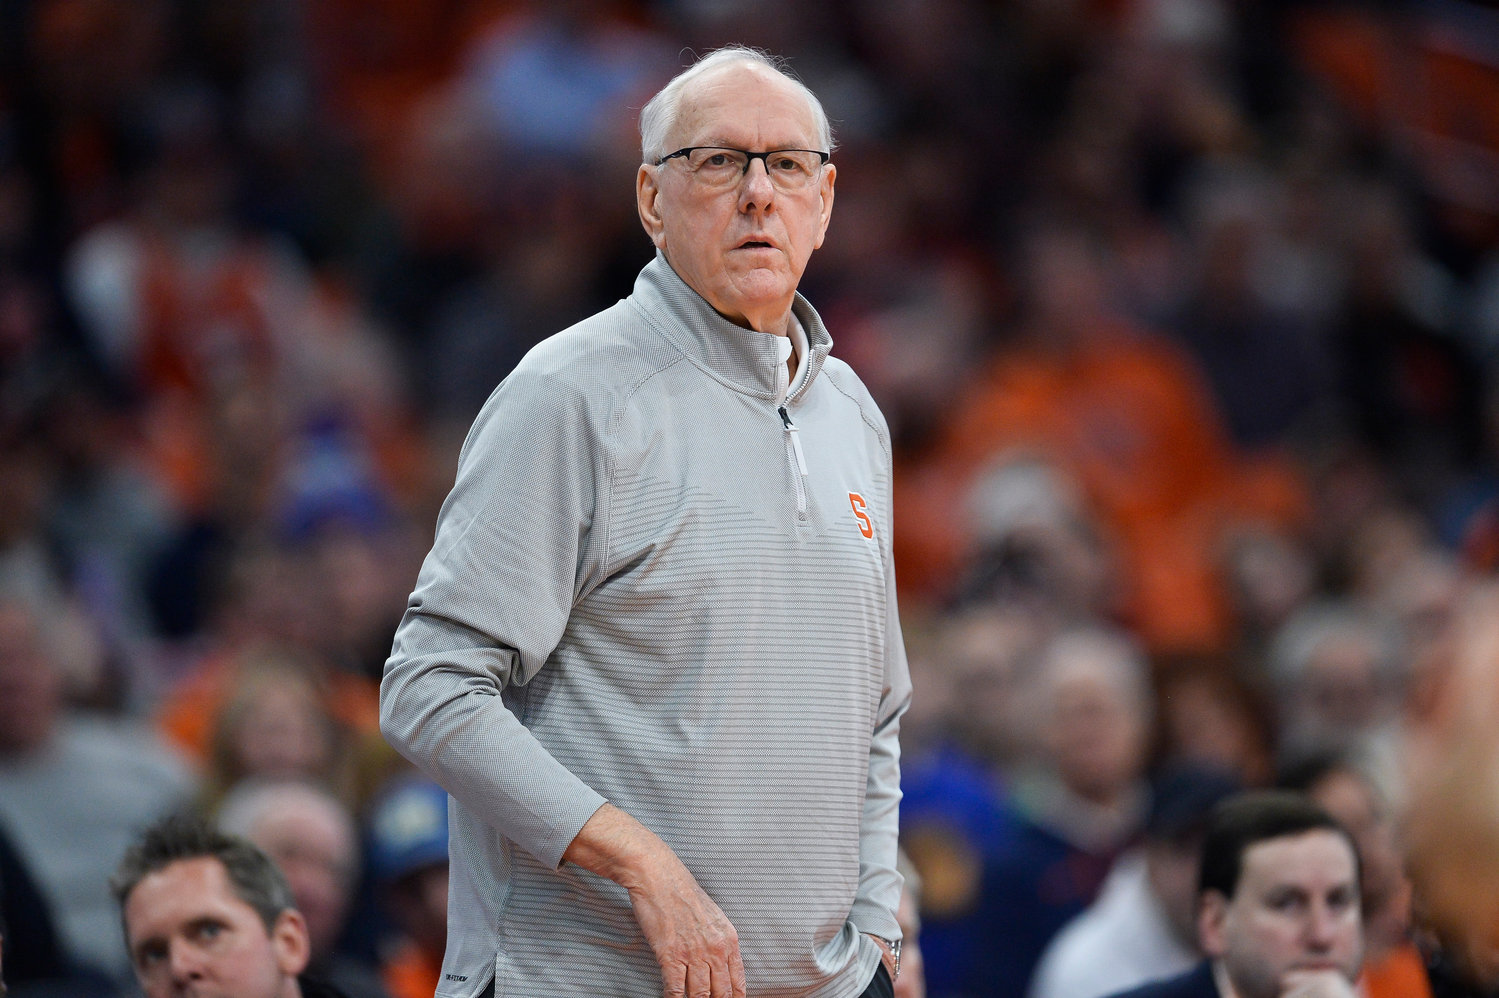 Syracuse coach Jim Boeheim watches from the sideline during the second half of the team's game against Virginia Tech on Wednesday night in Syracuse.